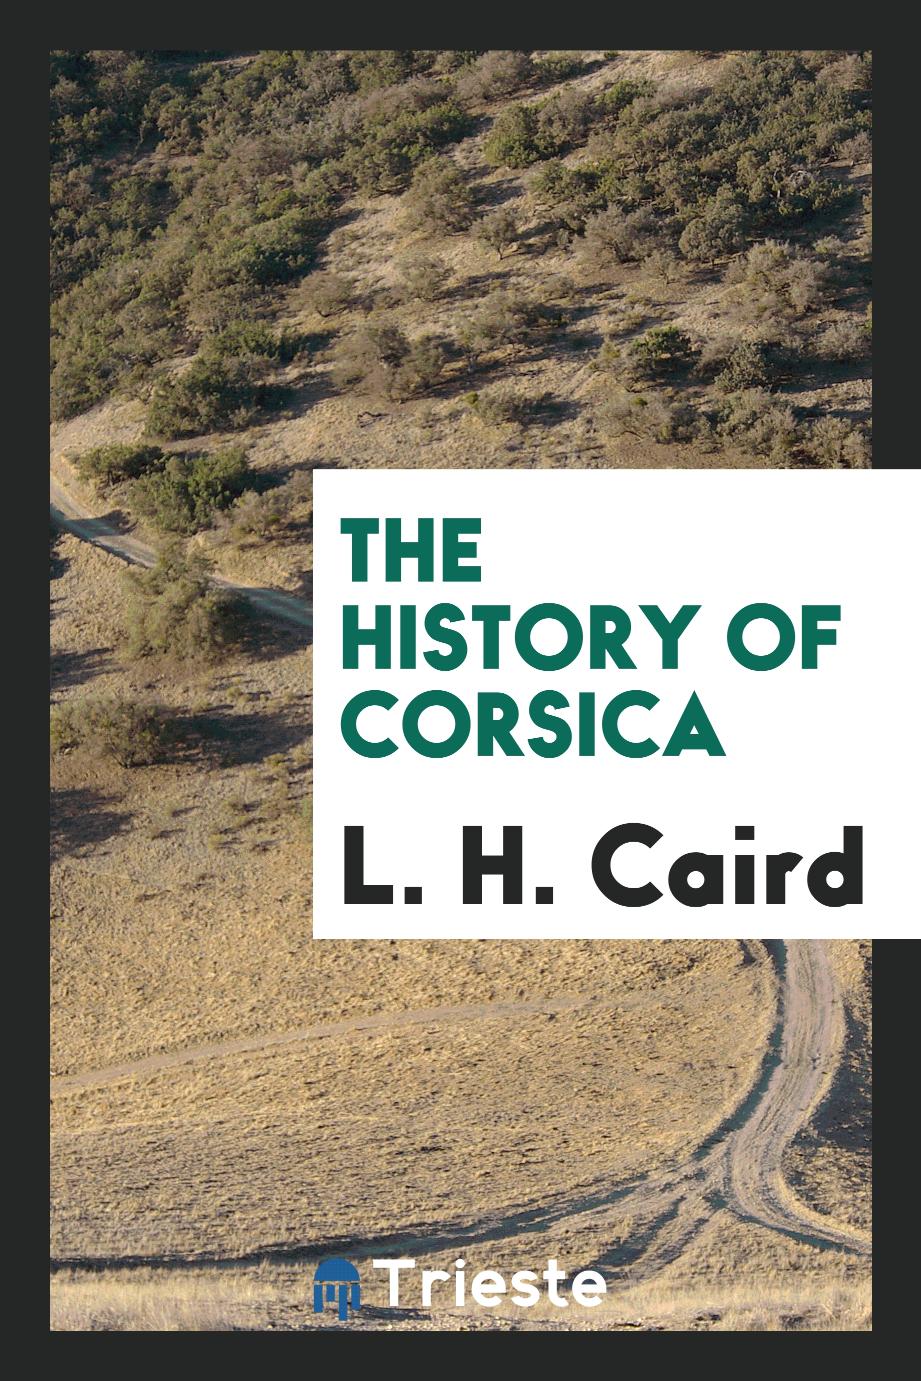 L. H. Caird - The History of Corsica